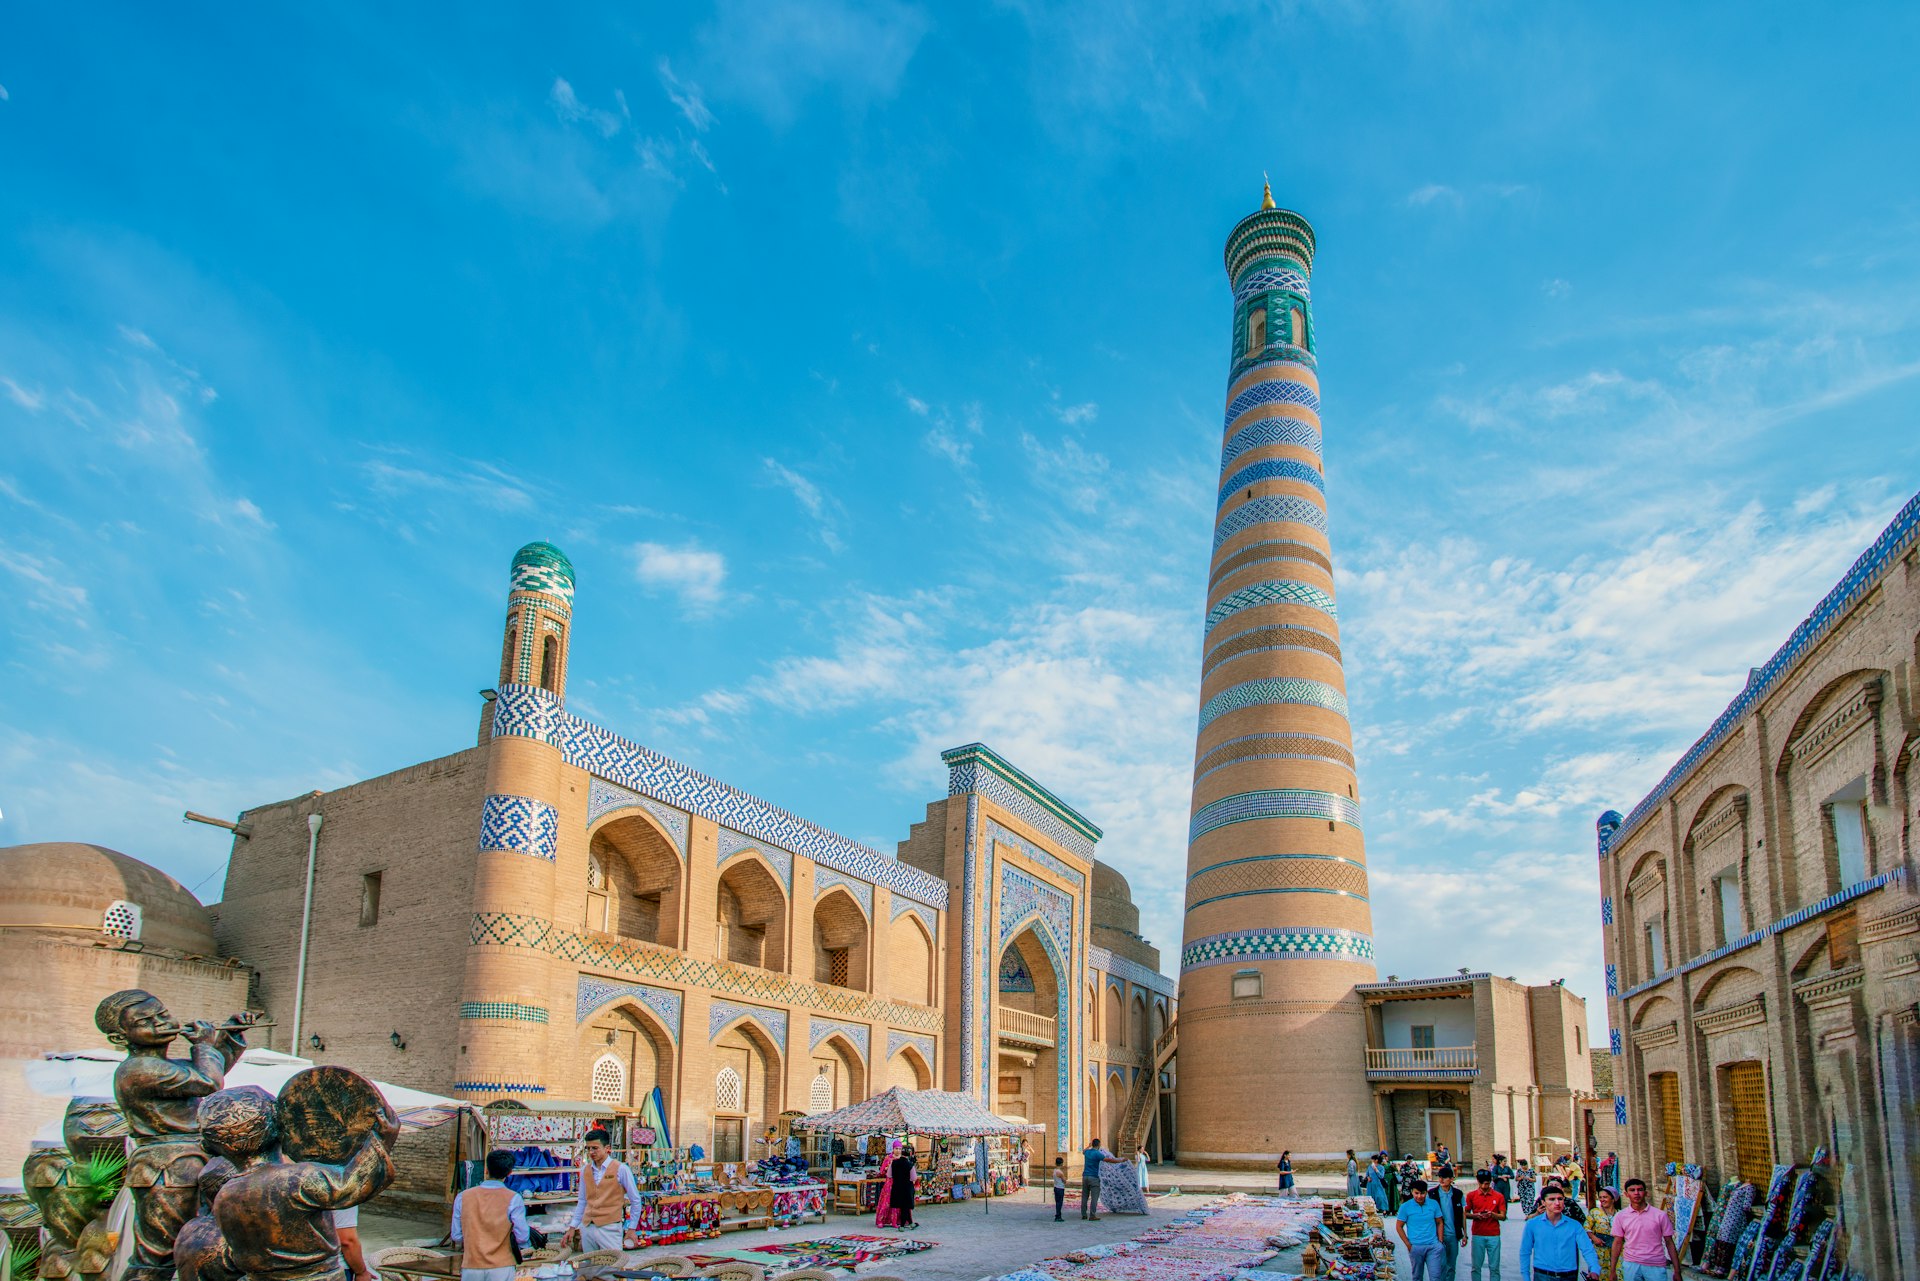 A market selling colorful textiles sets up at the foot of a tall minaret